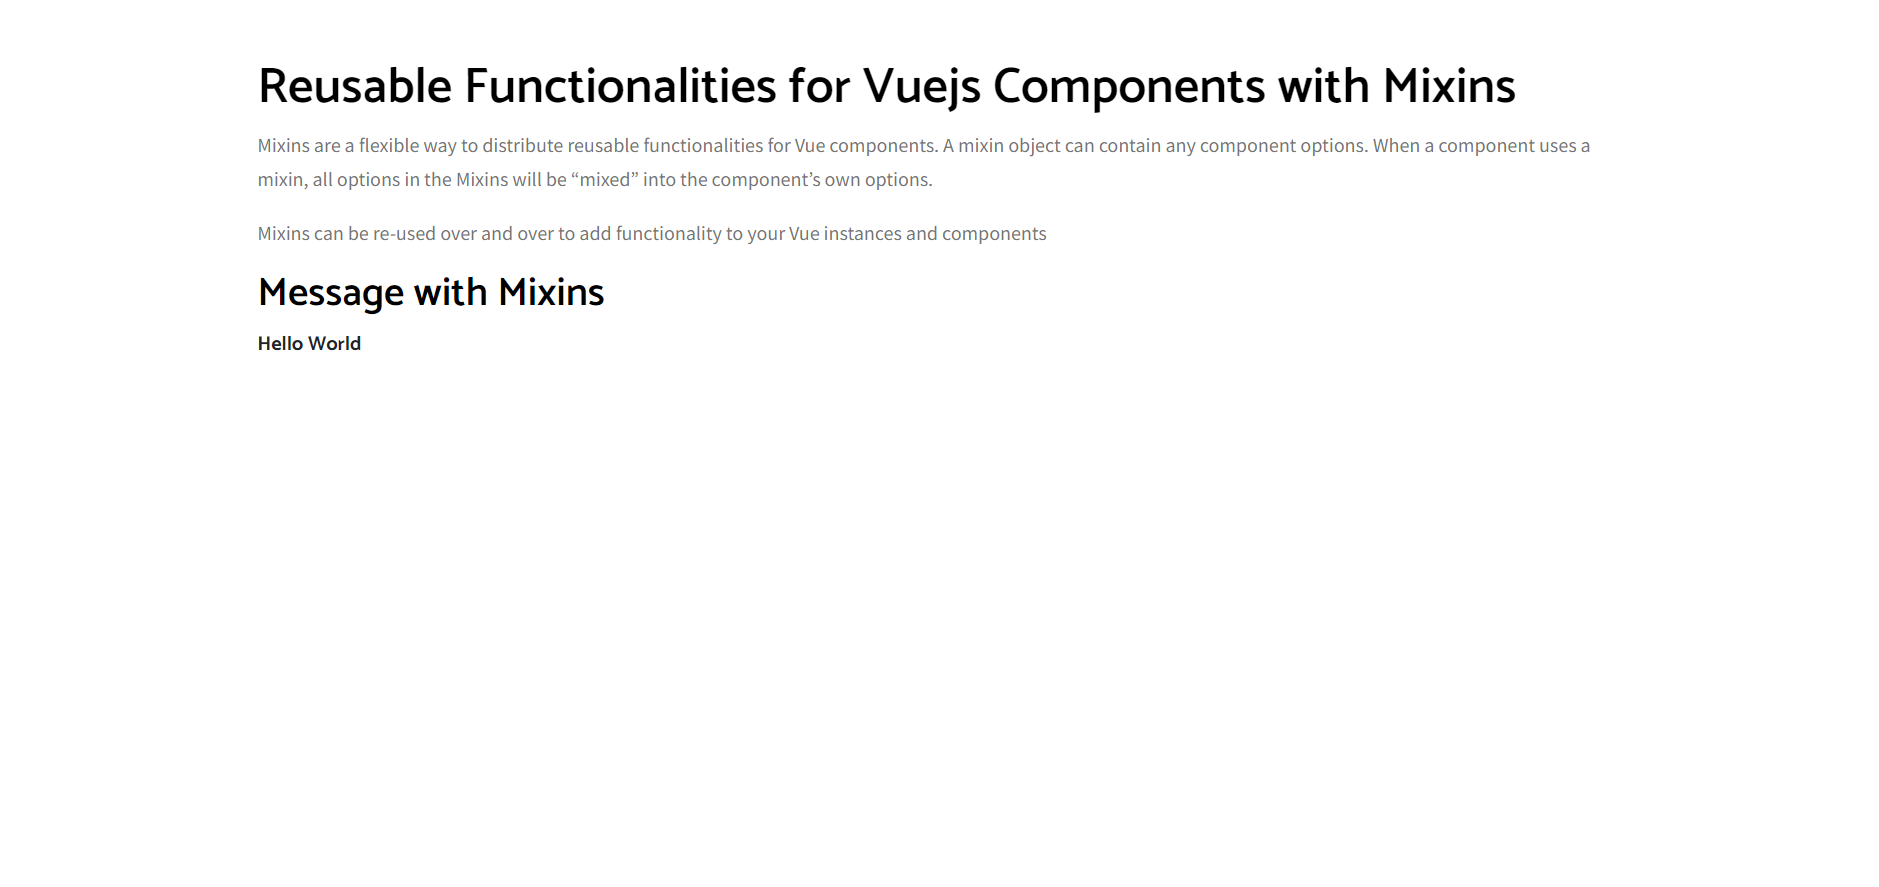 How to reuse the functionalities in vuejs using mixins?